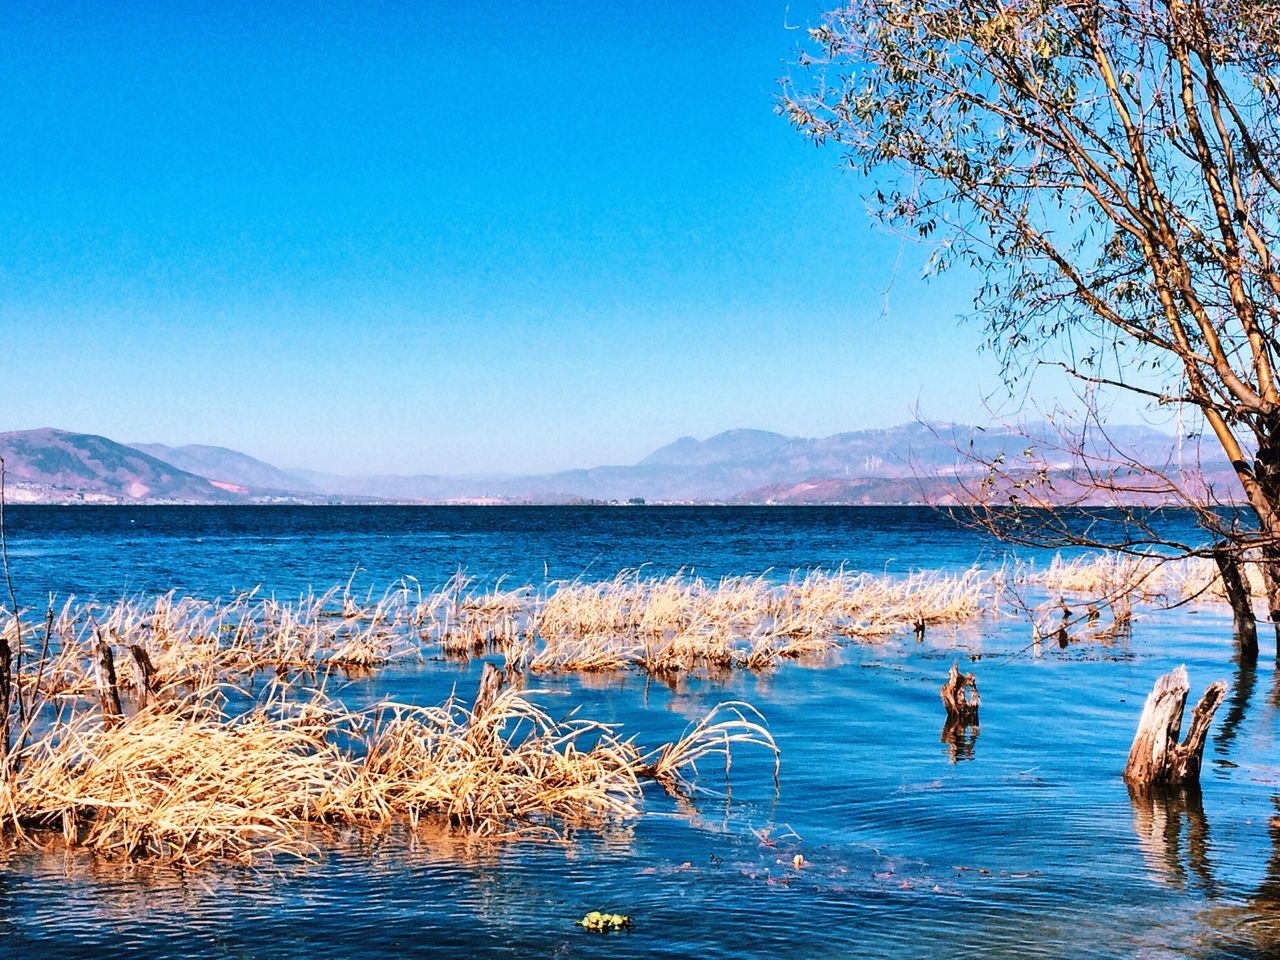 water, blue, mountain, tranquil scene, tranquility, scenics, clear sky, beauty in nature, mountain range, lake, nature, copy space, idyllic, waterfront, day, non-urban scene, sea, landscape, outdoors, remote